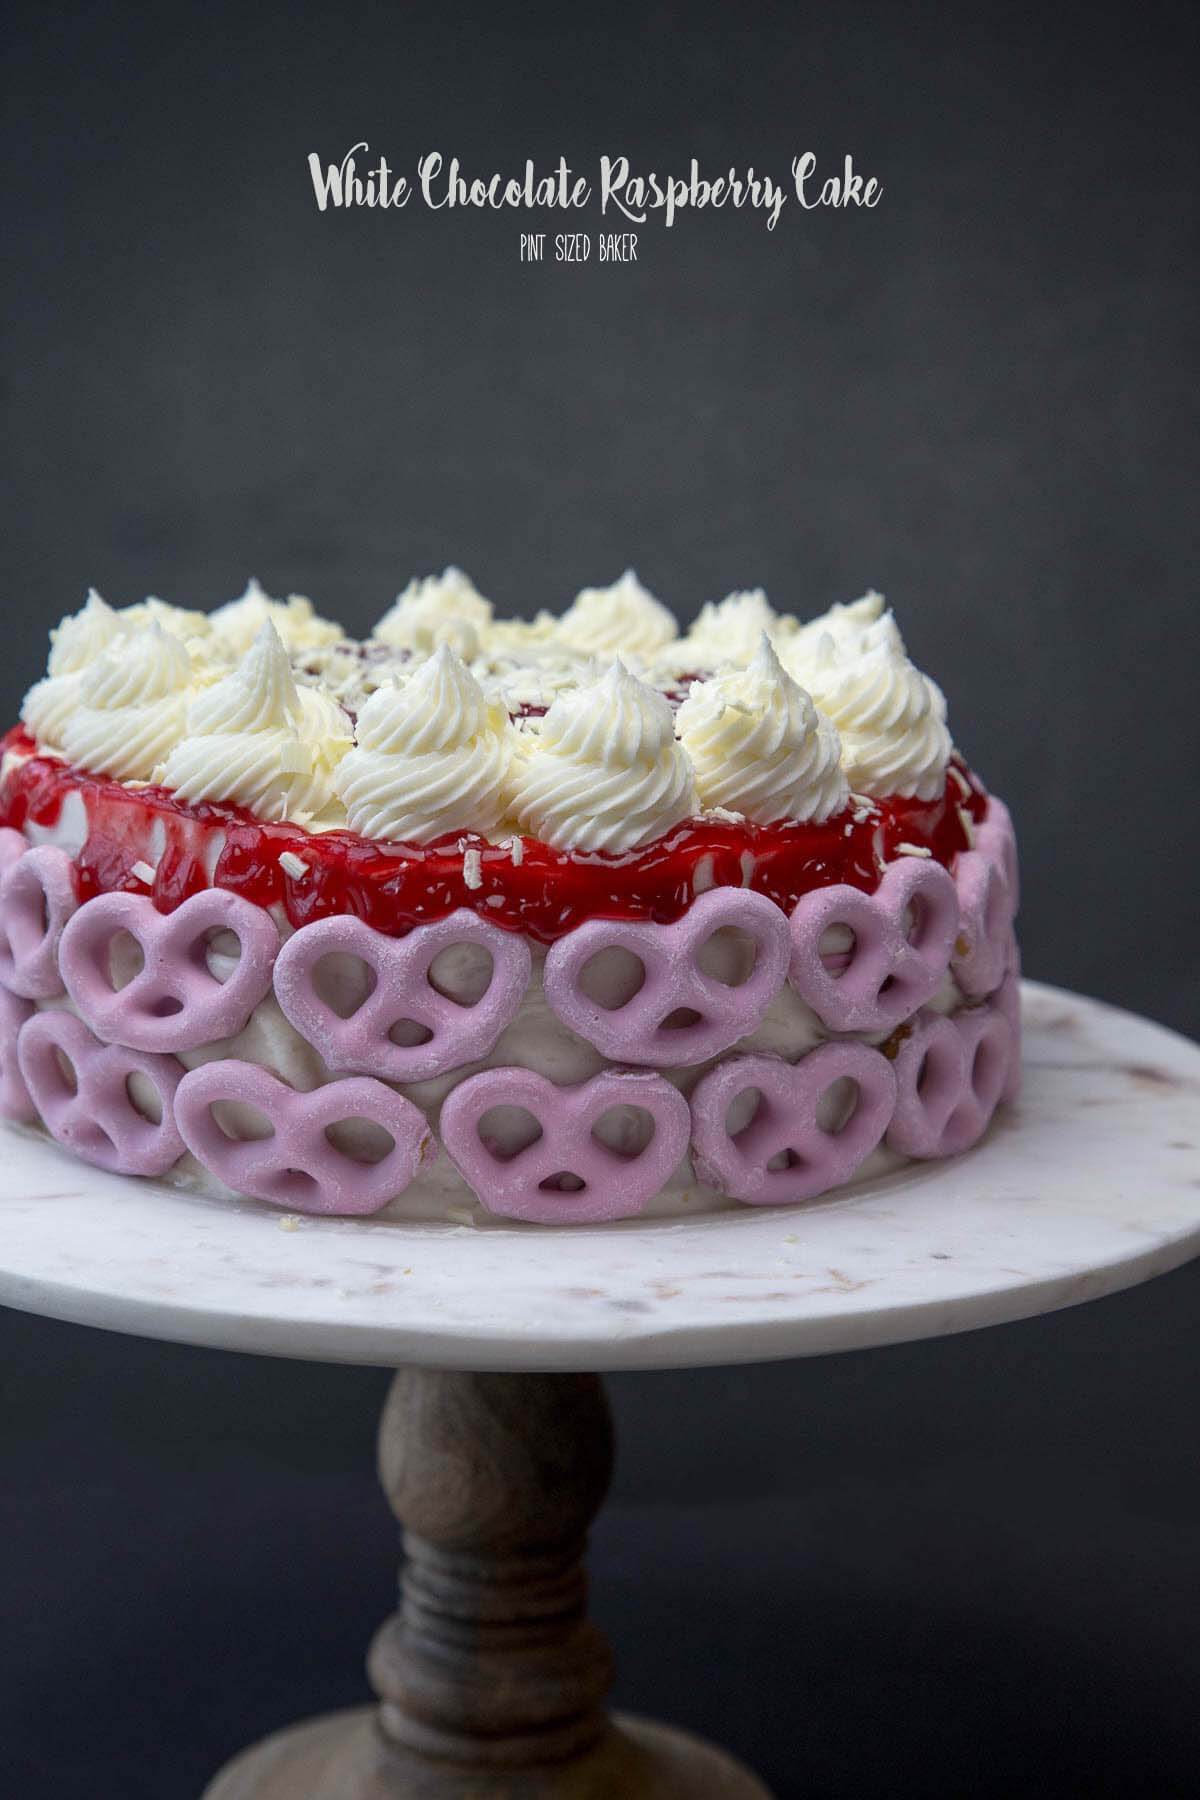 Everyone is going to want a slice of this White Chocolate Raspberry Cake decorated with sweet and salty raspberry pretzels.